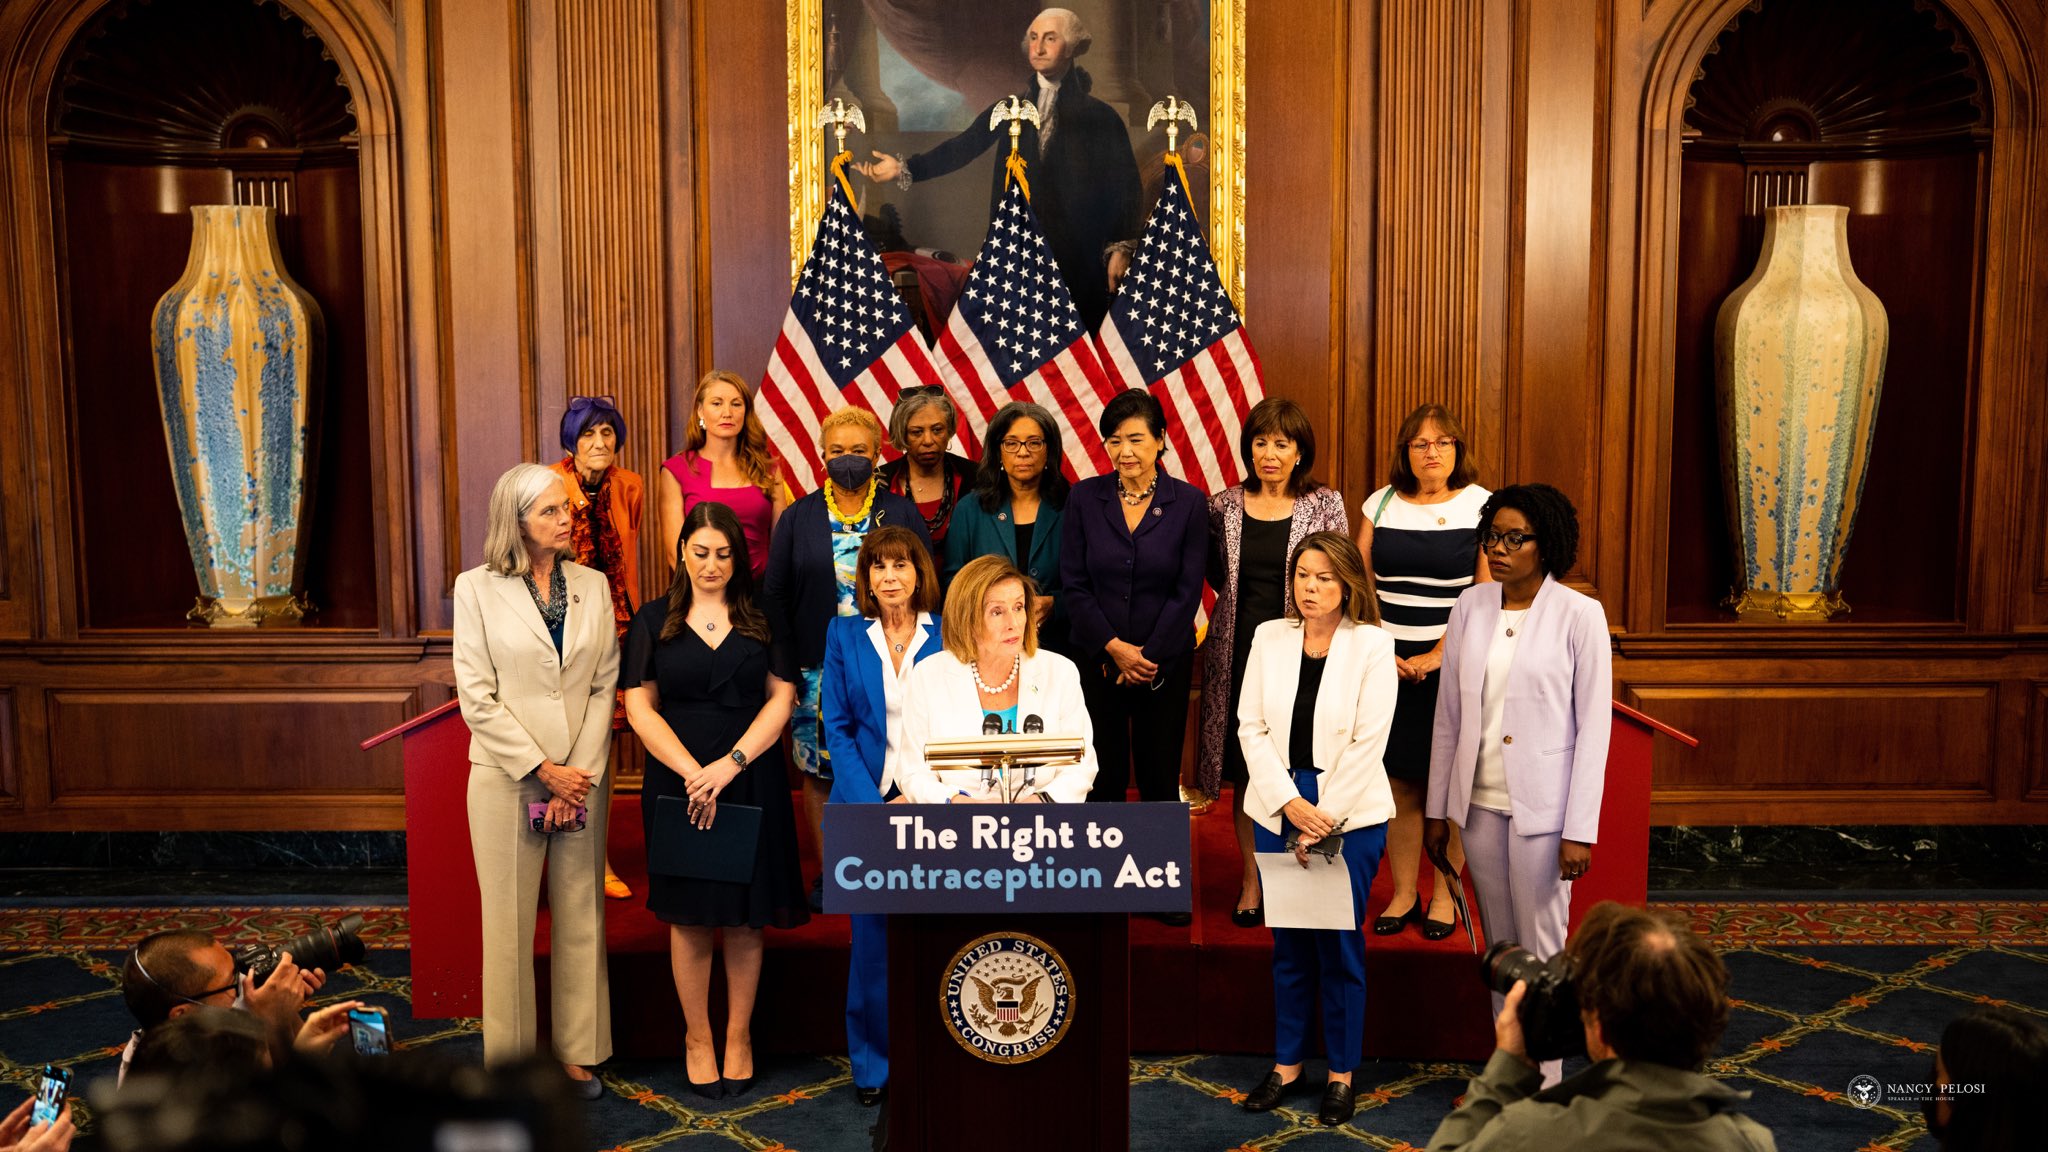 Speaker Pelosi at a Right to Contraception Act press conference